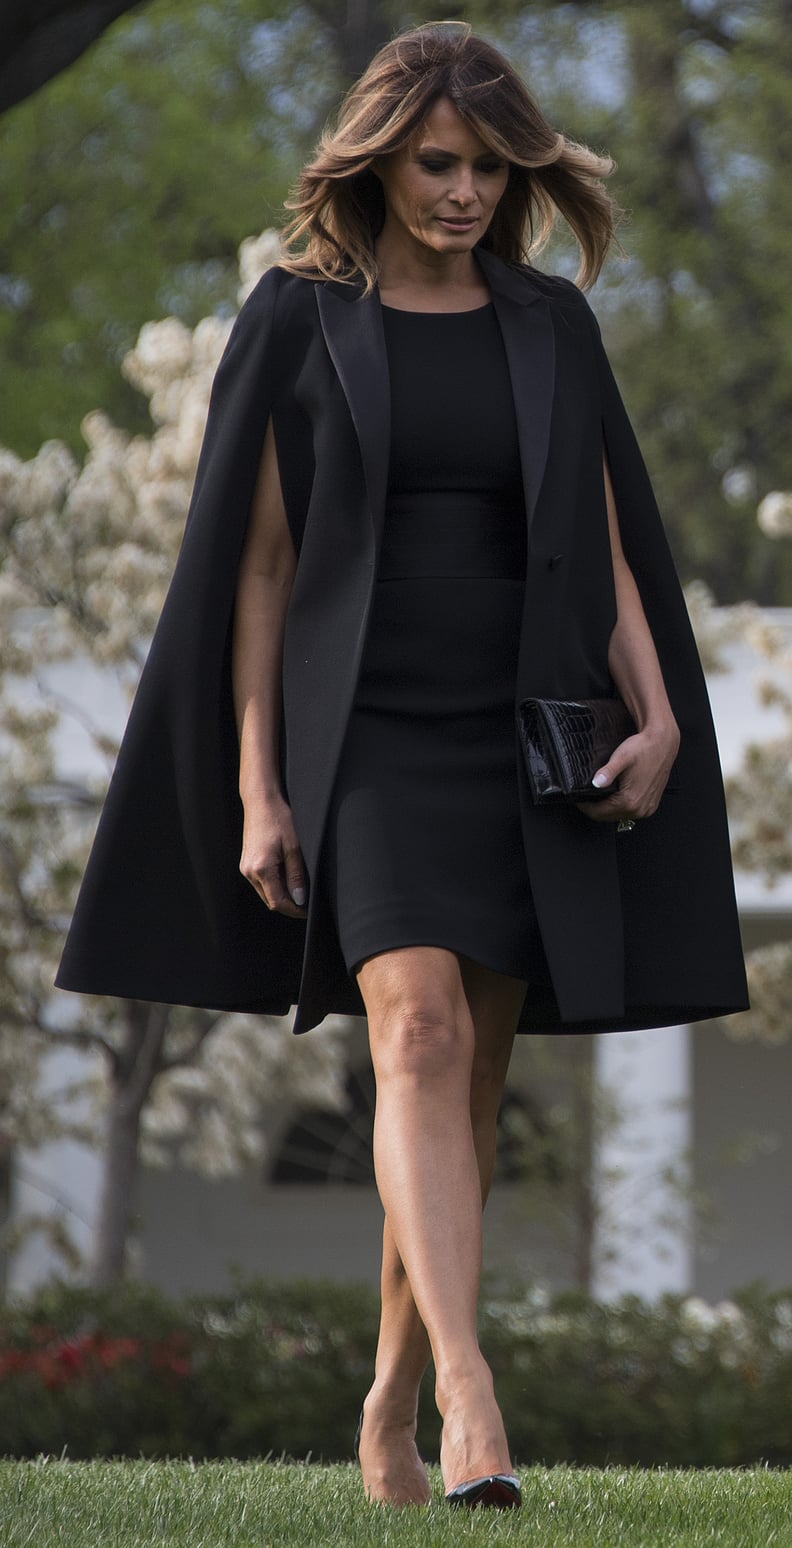 Melania Trump in Her Givenchy Cape